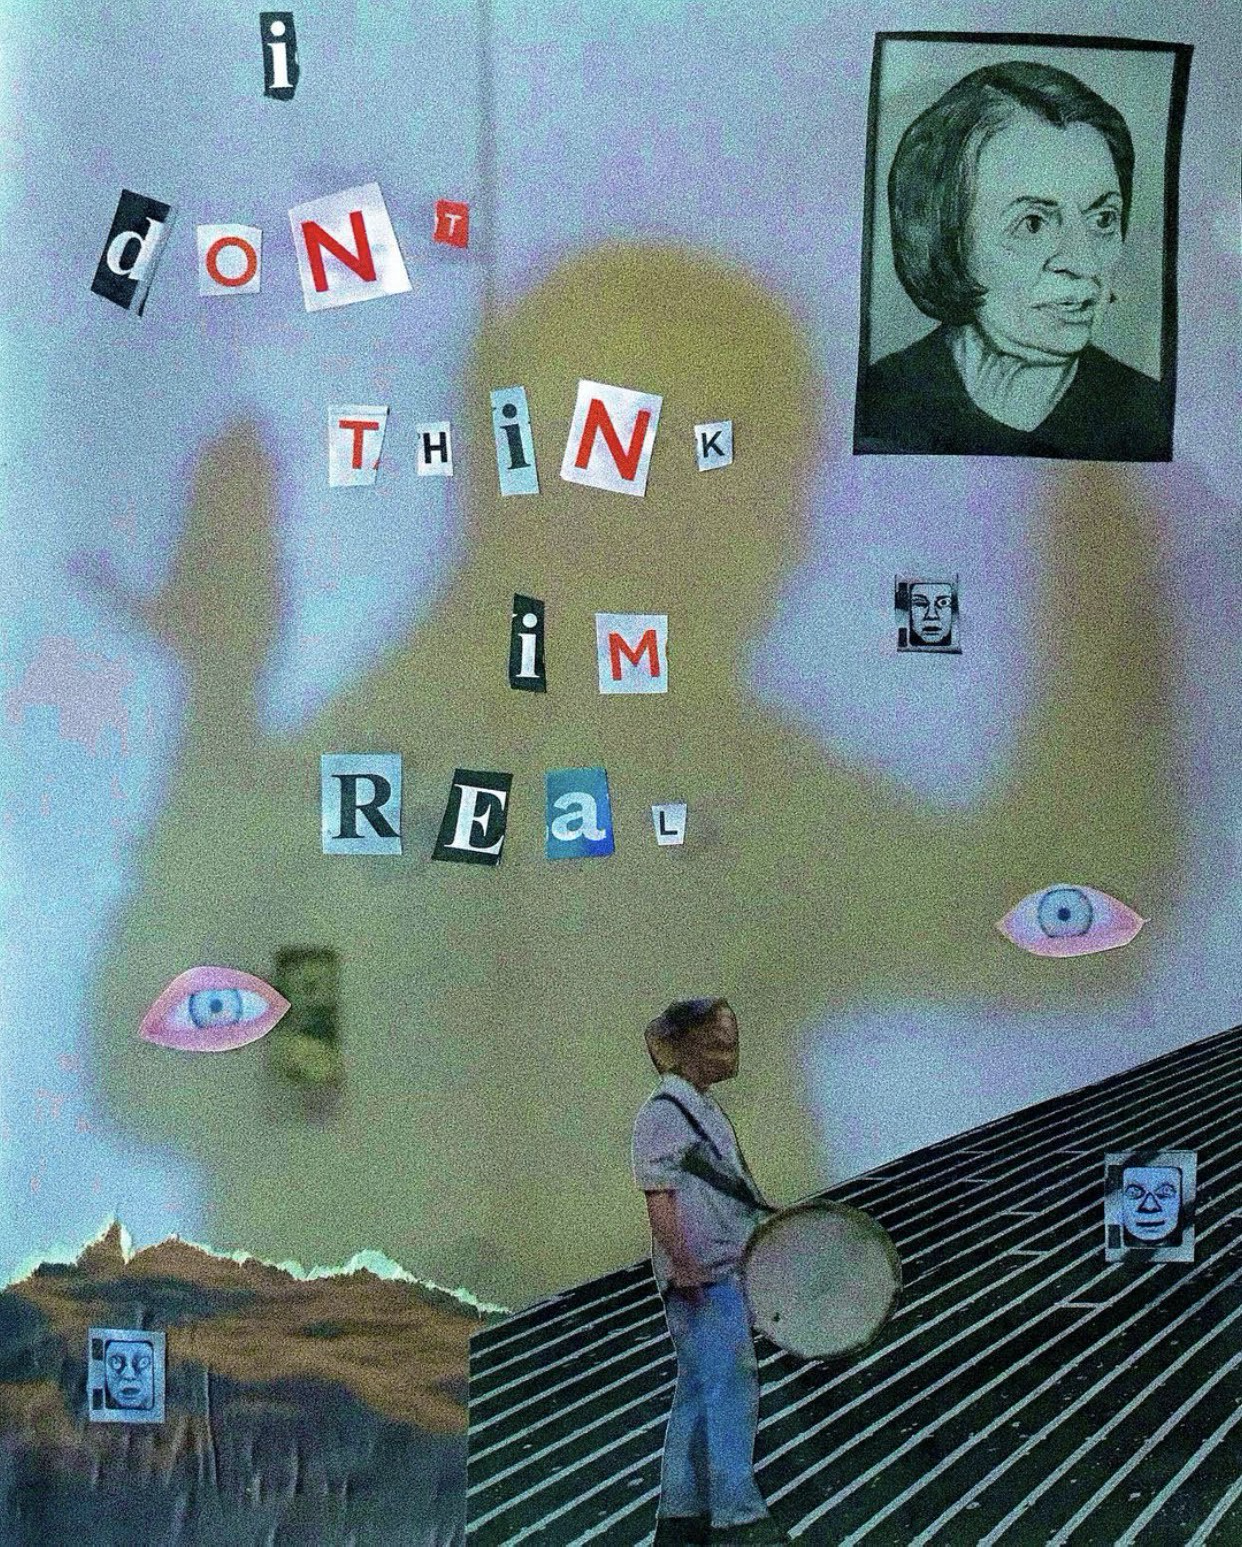 A collage with cutout text saying "I dont think im real", with eyes and a silhouette around the text.